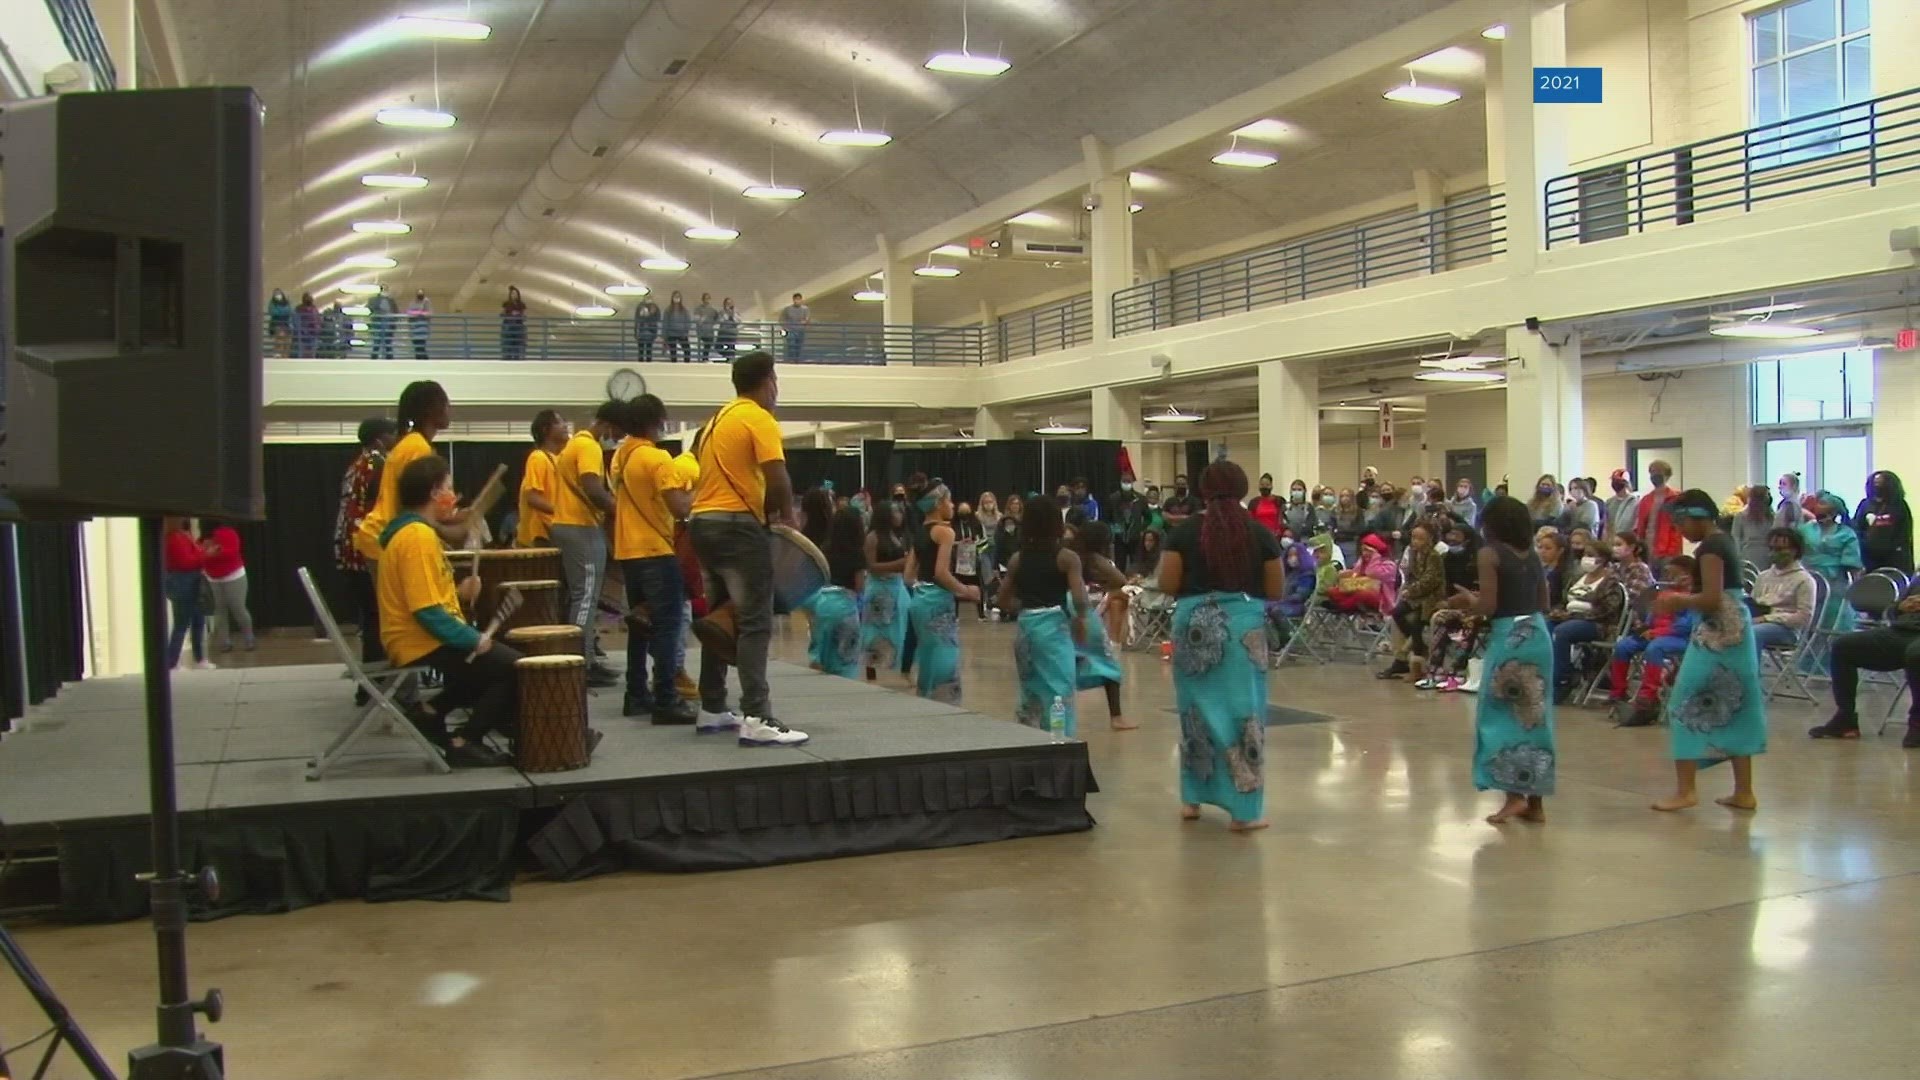 The event is hosted by Real Talk Mentoring Inc., which serves more than 200 students in 11 Knoxville area schools.